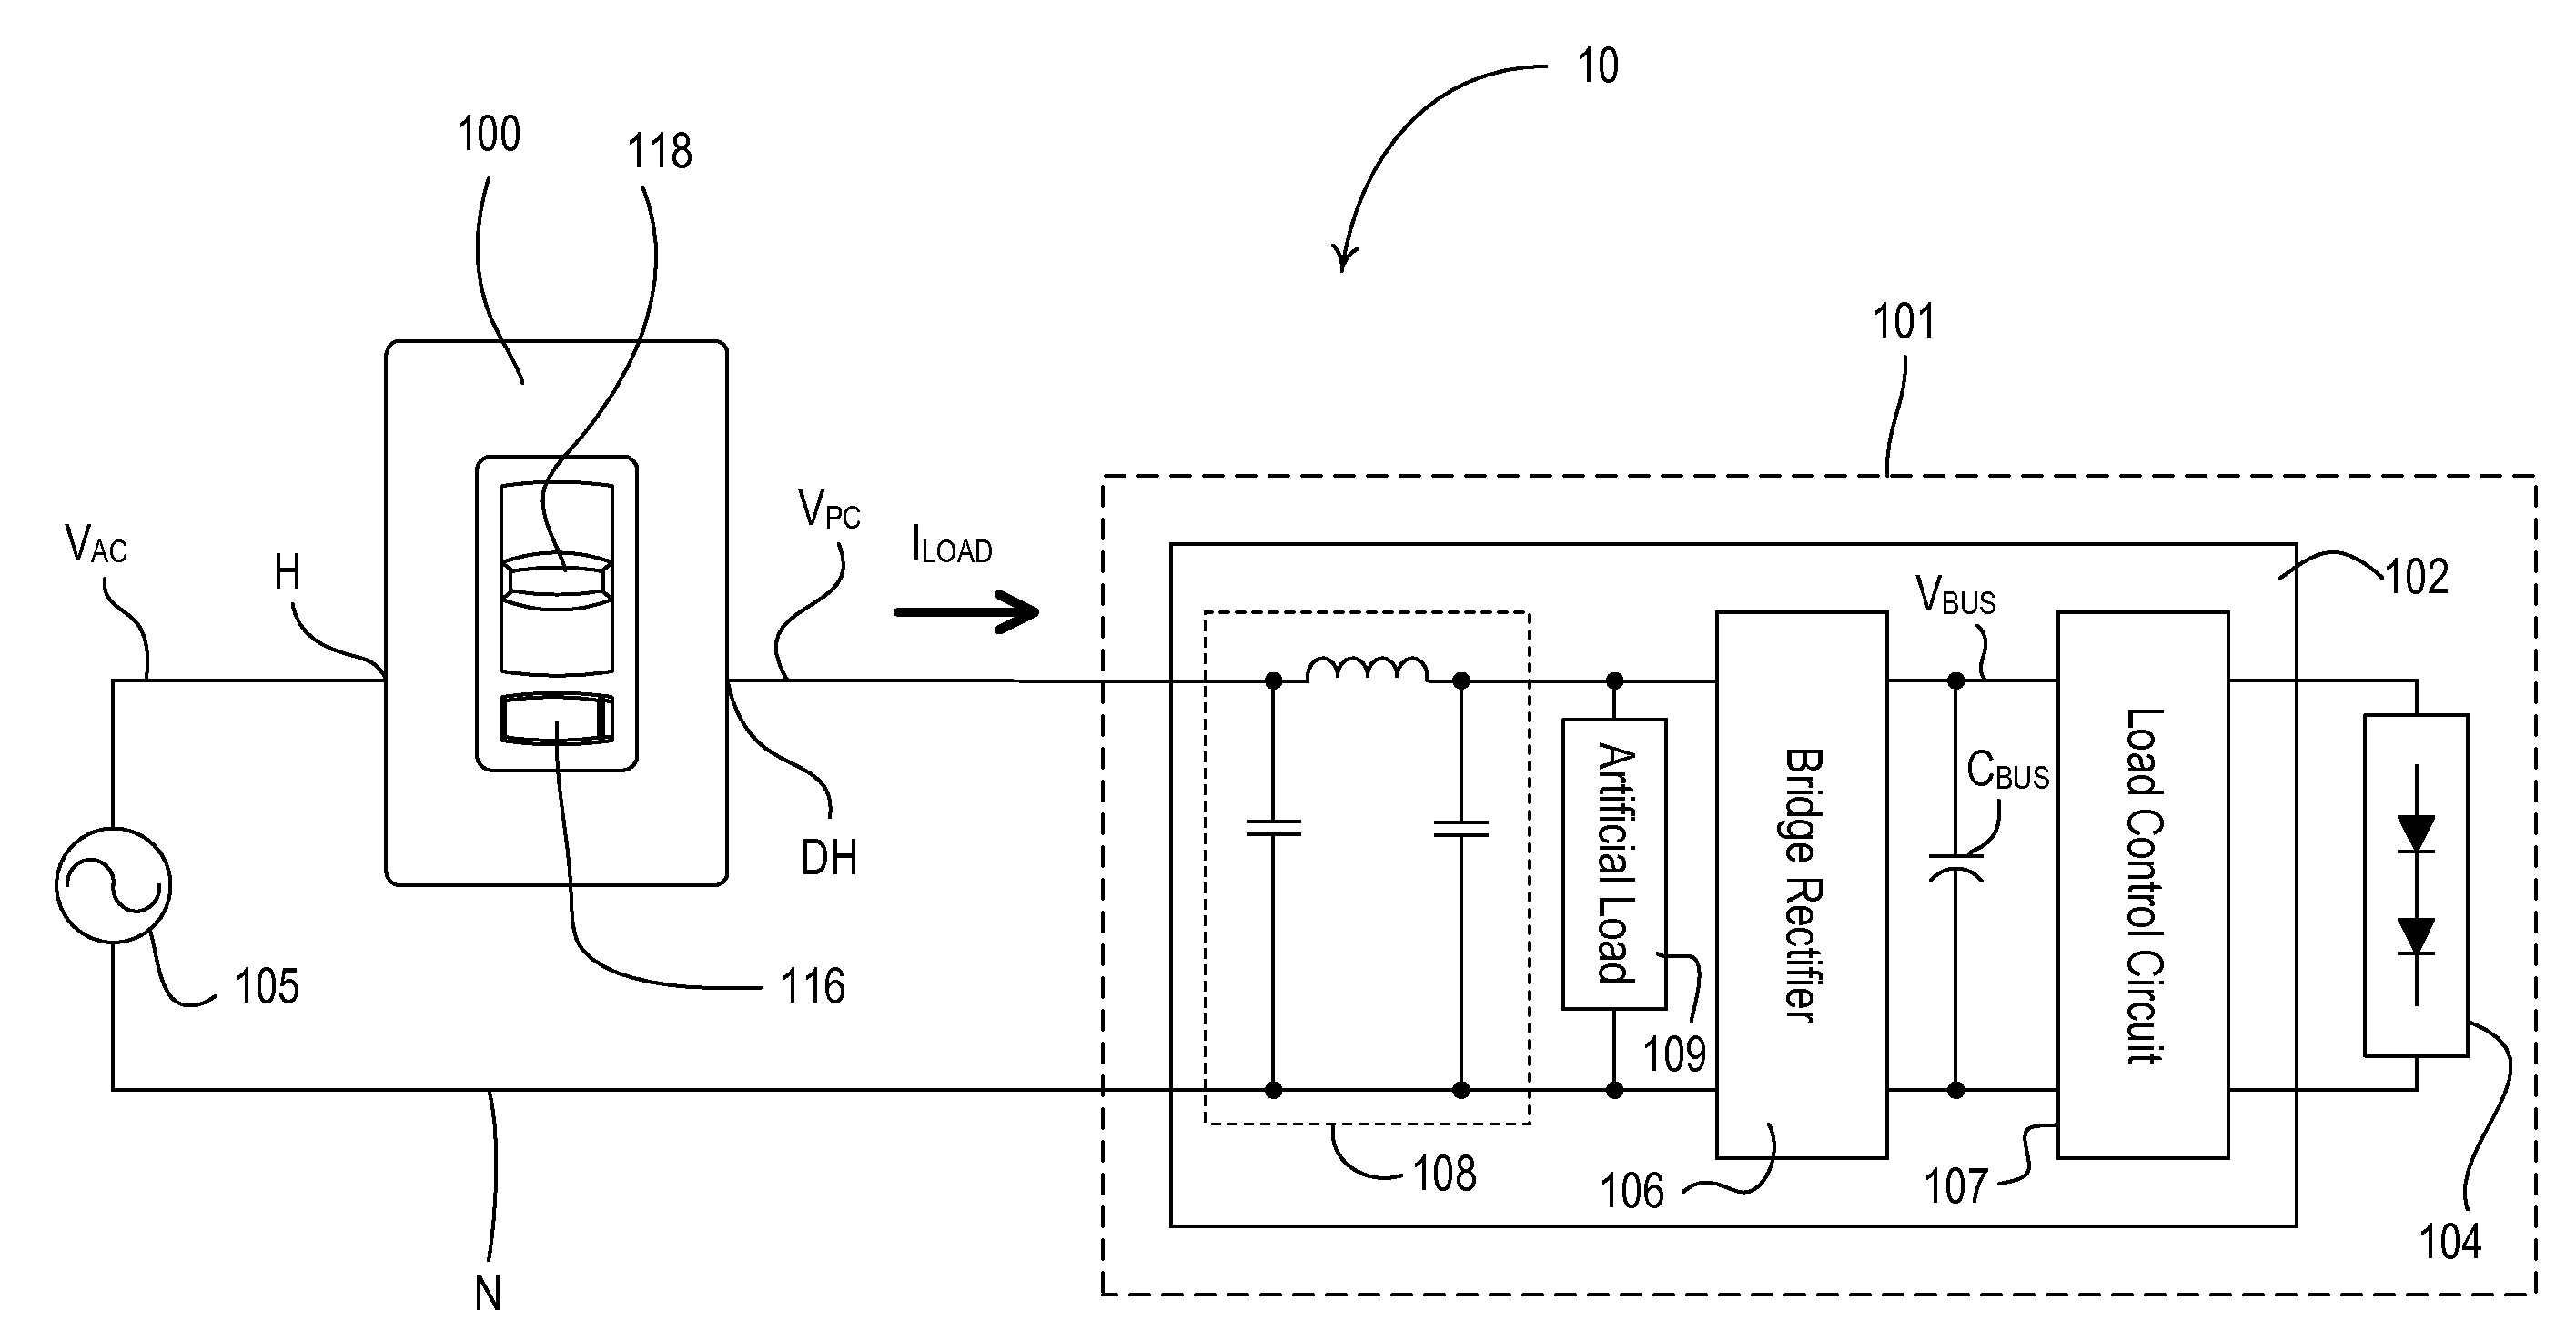 Two-wire dimmer switch for low-power loads